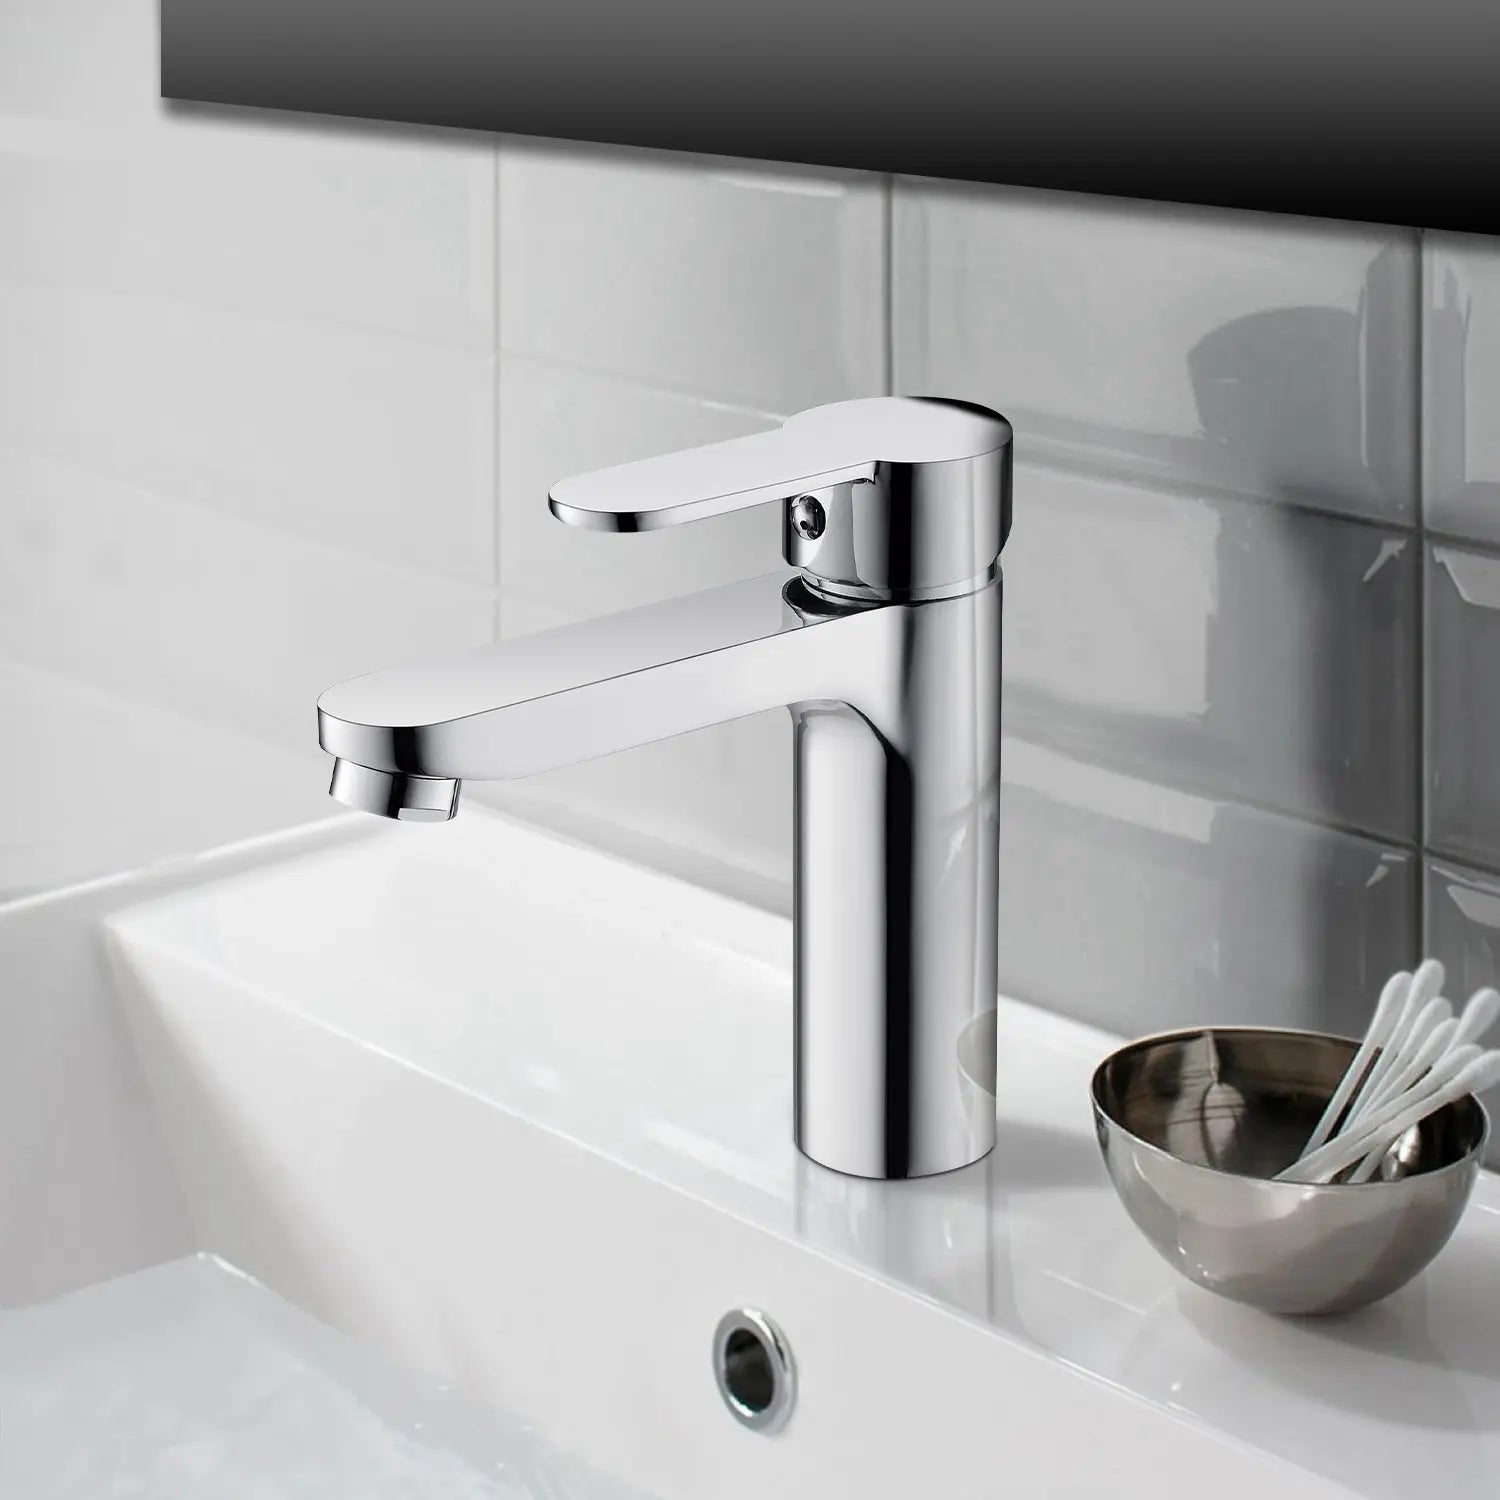 Single Hole Single-Handle Stainless Steel Bathroom Faucet in contemporary design - larahd